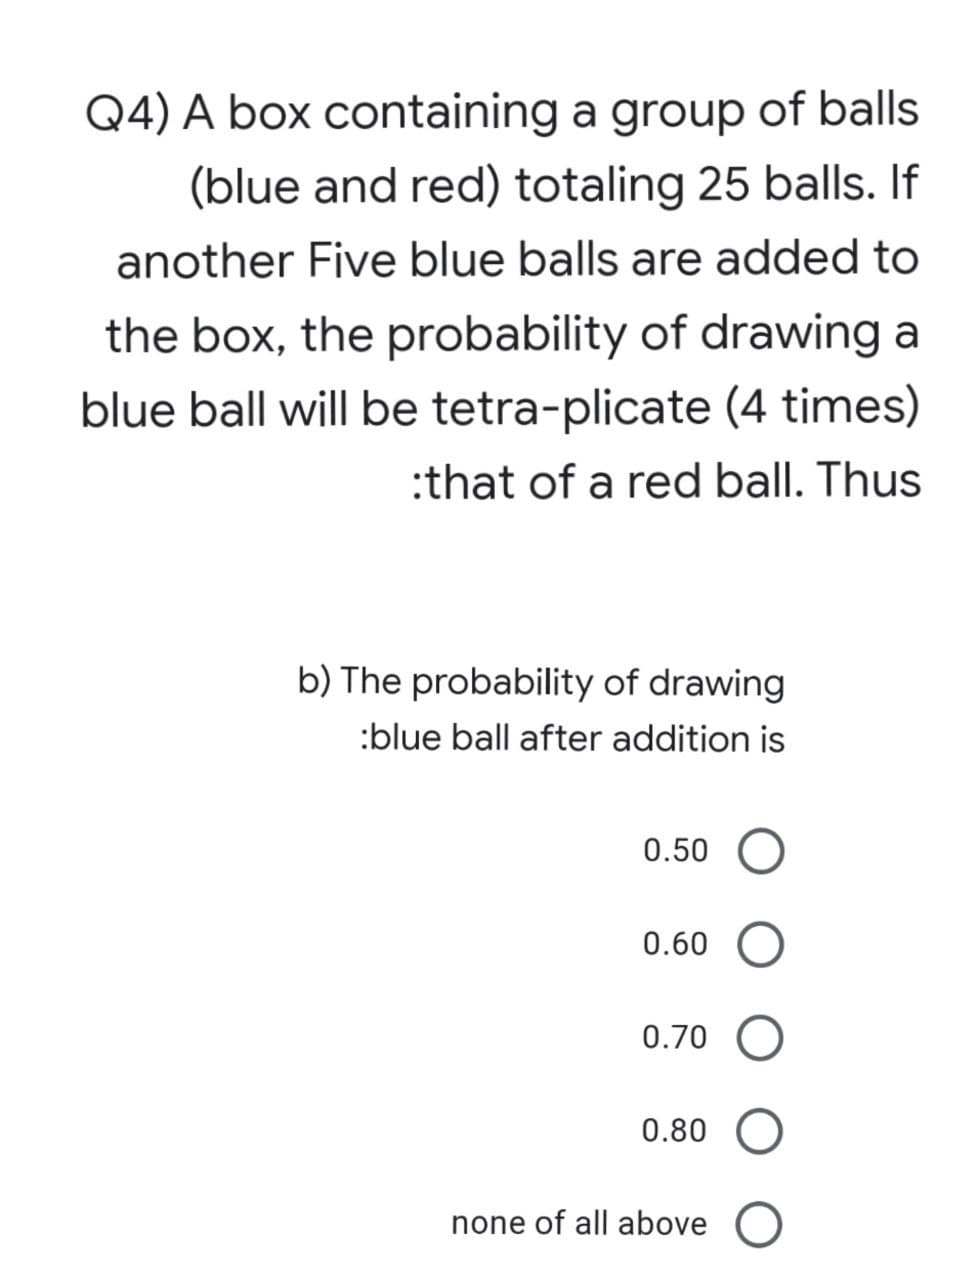 Q4) A box containing a group of balls
(blue and red) totaling 25 balls. If
another Five blue balls are added to
the box, the probability of drawing a
blue ball will be tetra-plicate (4 times)
:that of a red ball. Thus
b) The probability of drawing
:blue ball after addition is
0.50
0.60
0.70 O
0.80
none of all above